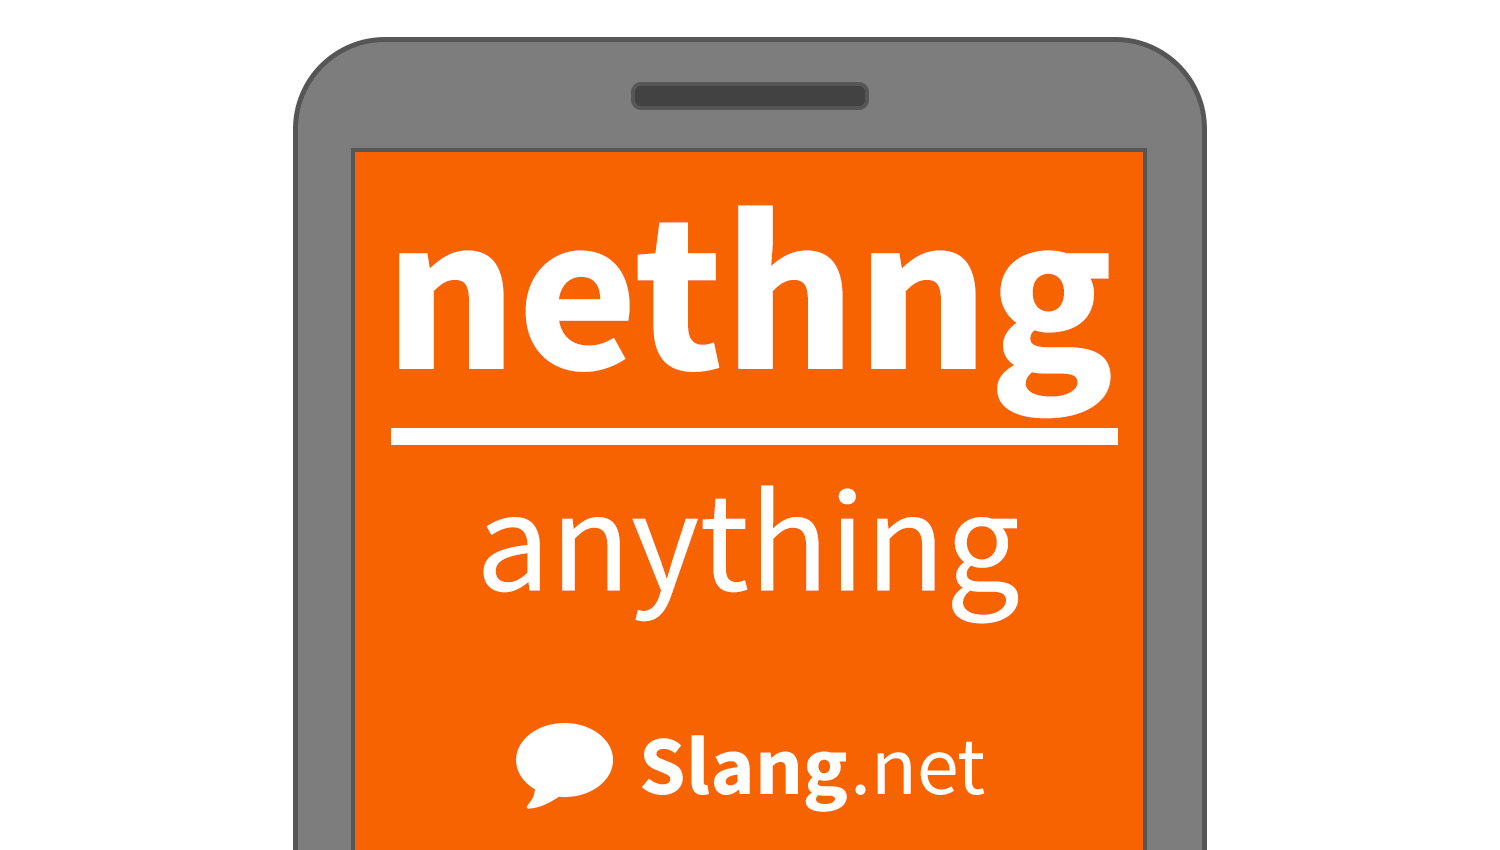 You may see &quot;nethng&quot; as an abbreviation for &quot;anything&quot; in messages and emails